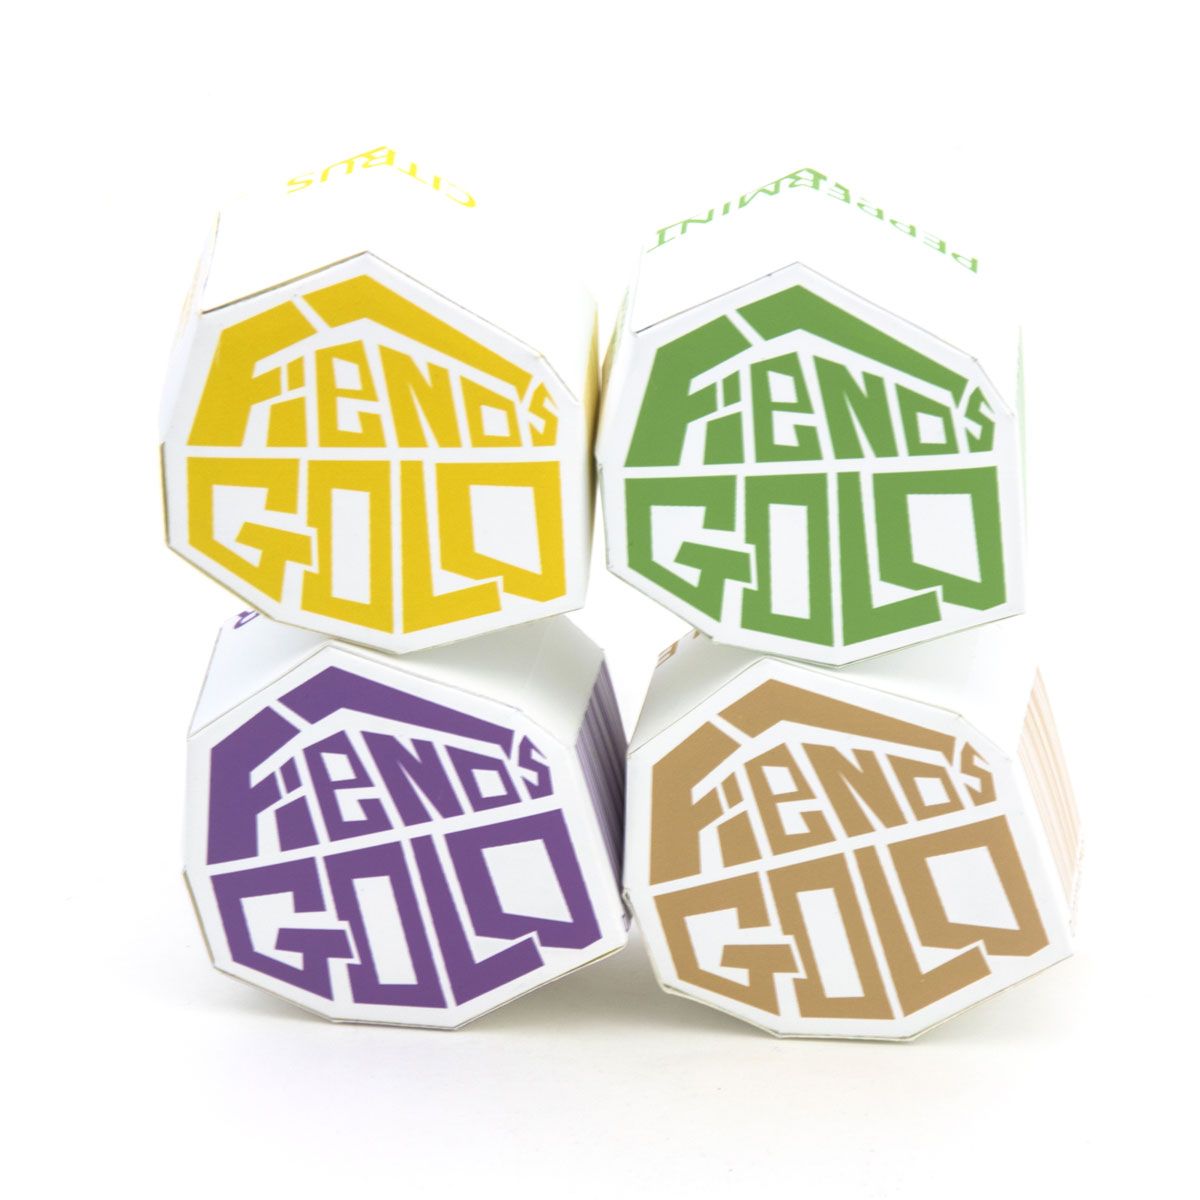 Fiends Gold Branded Tea Collection